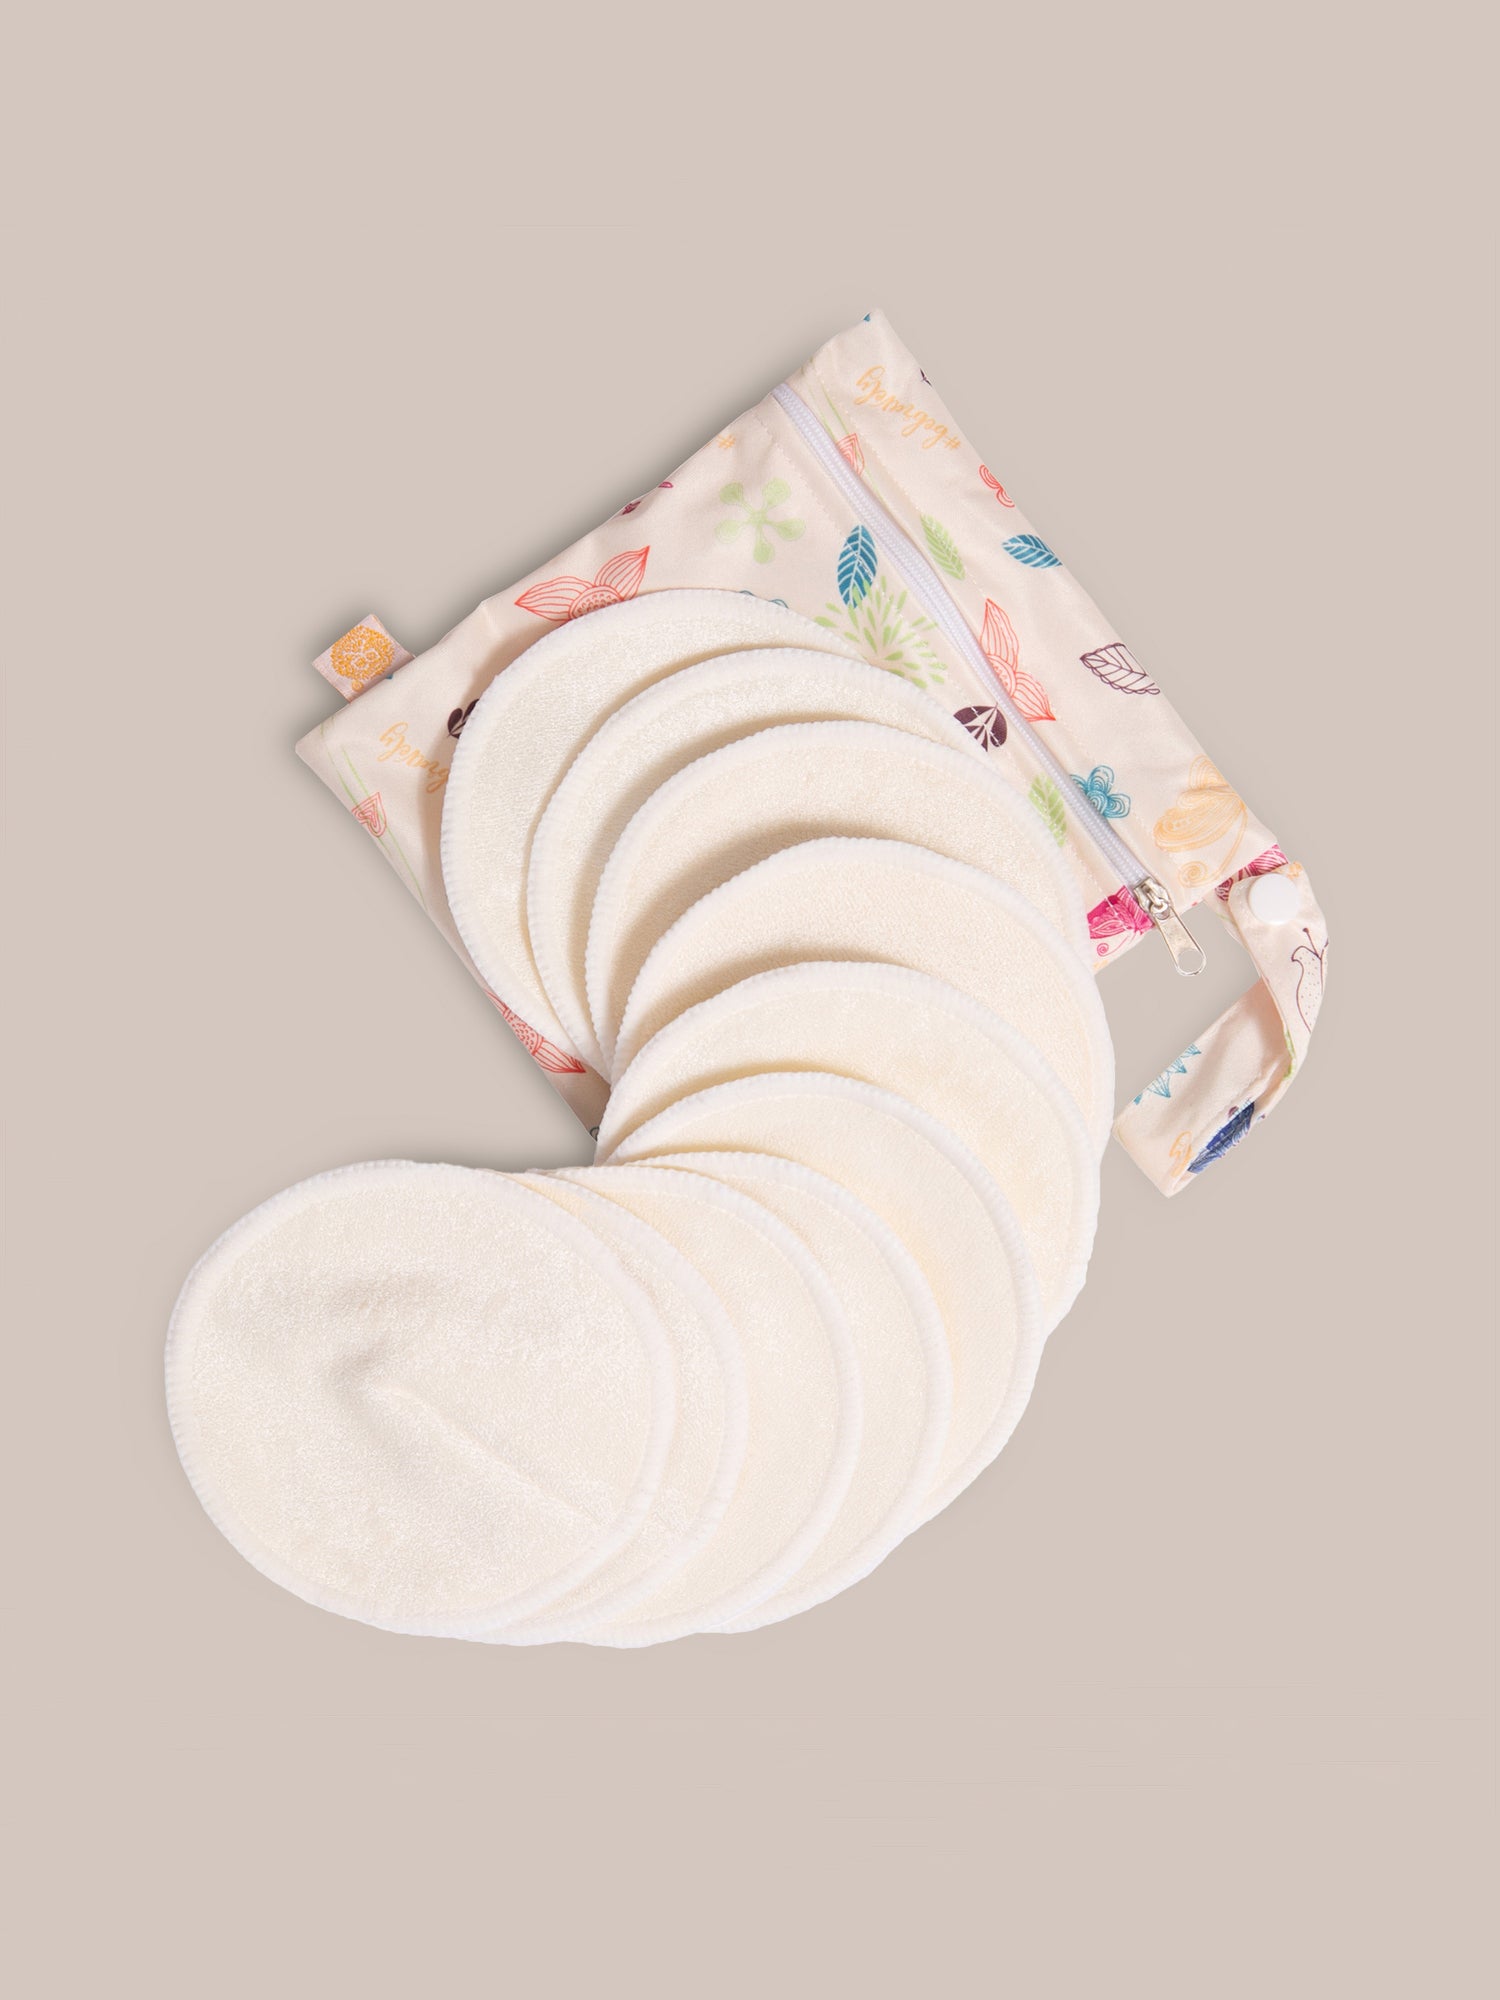 Buy New Beginnings Bamboo Breast Pads 80 Pack Online at Chemist